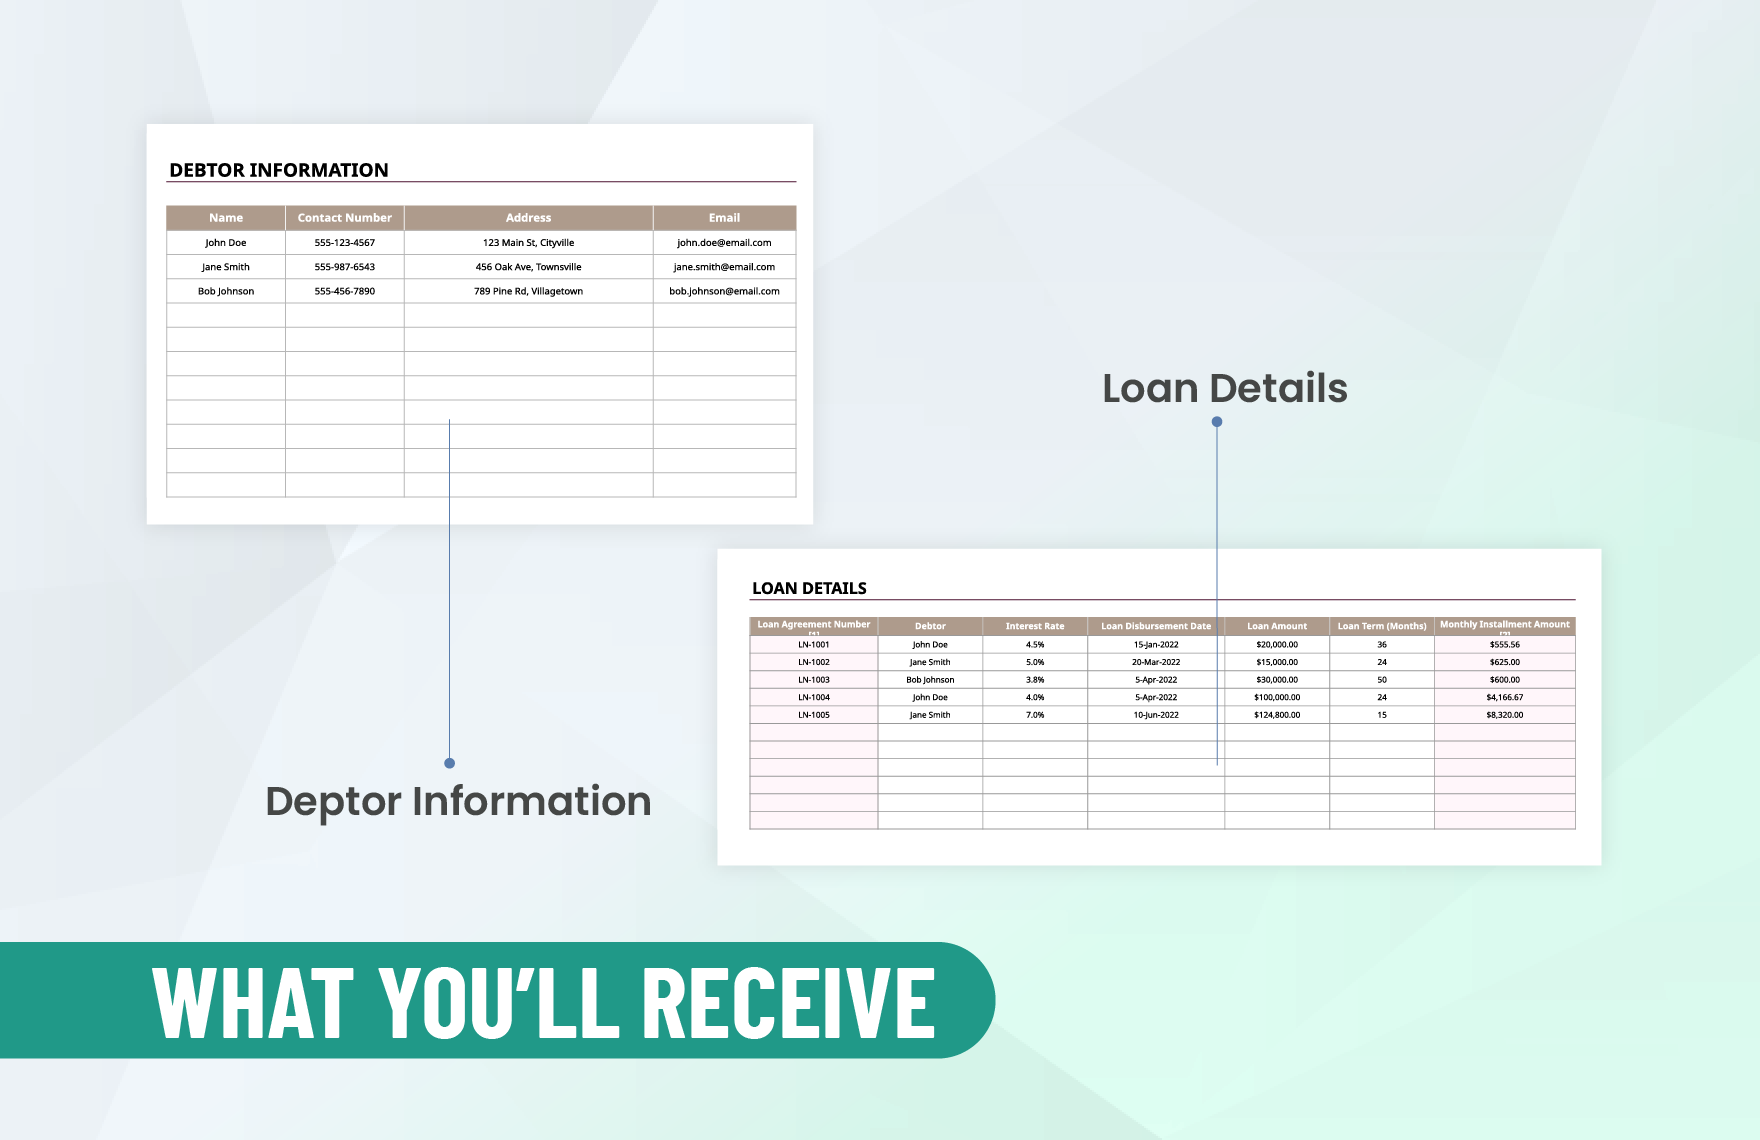 Printable Amortization Schedule Template